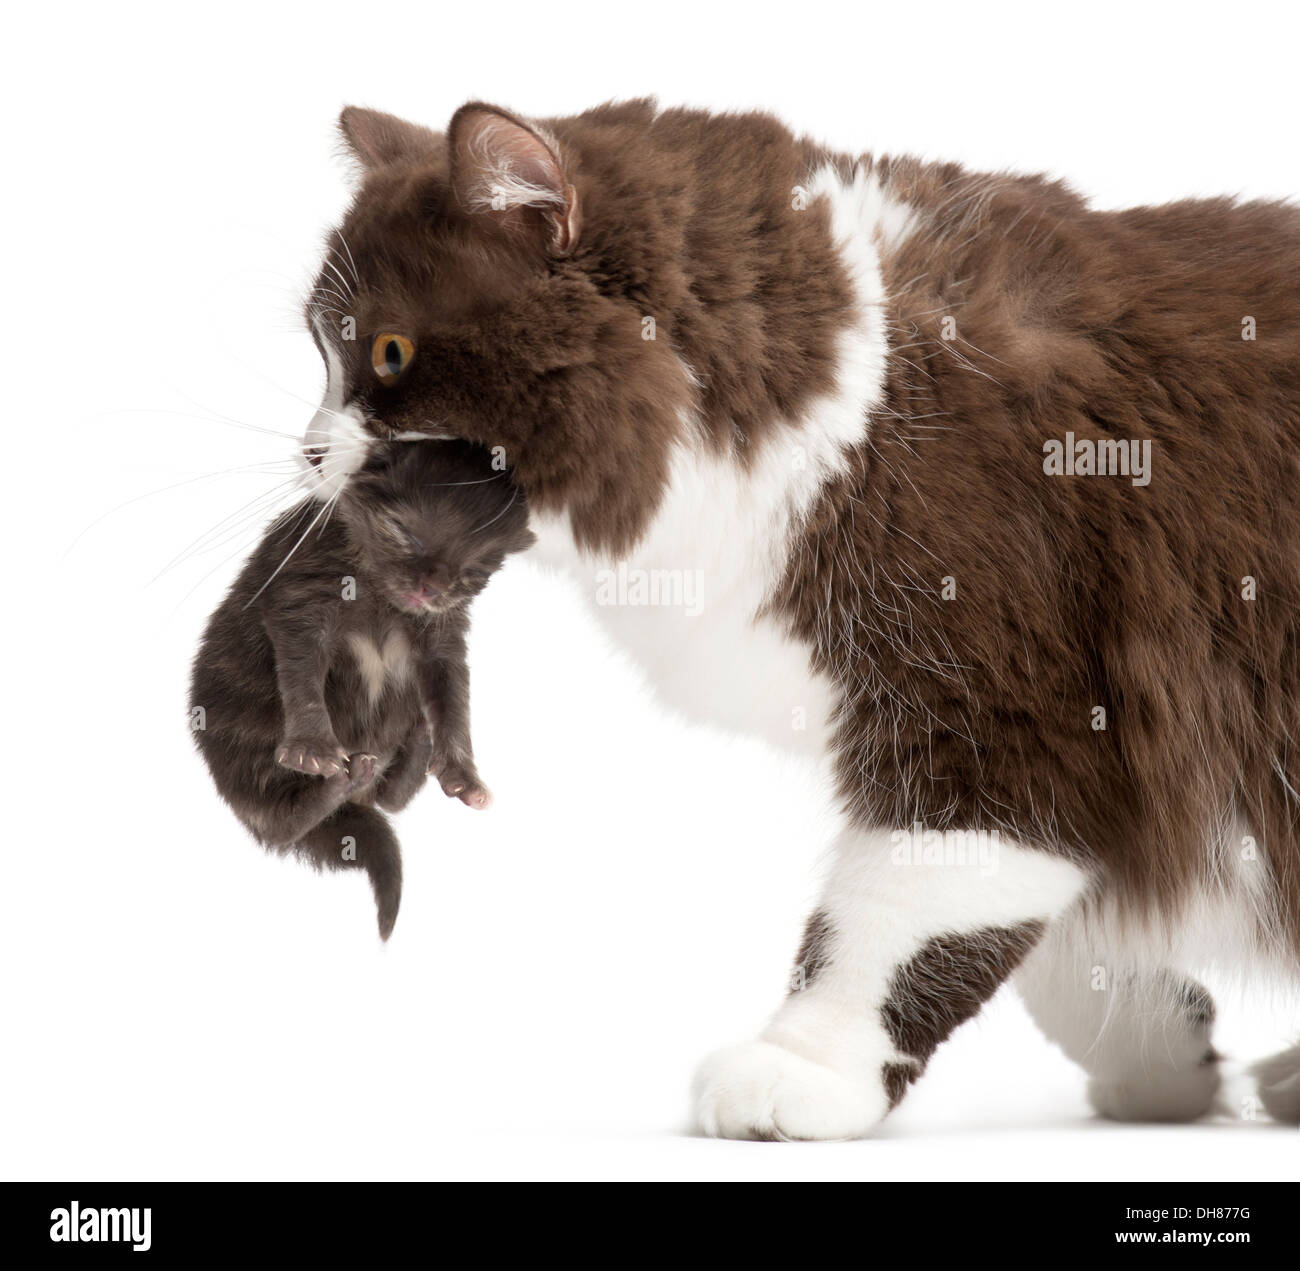 Side view of a British Longhair walking, carrying kitten against white background Stock Photo